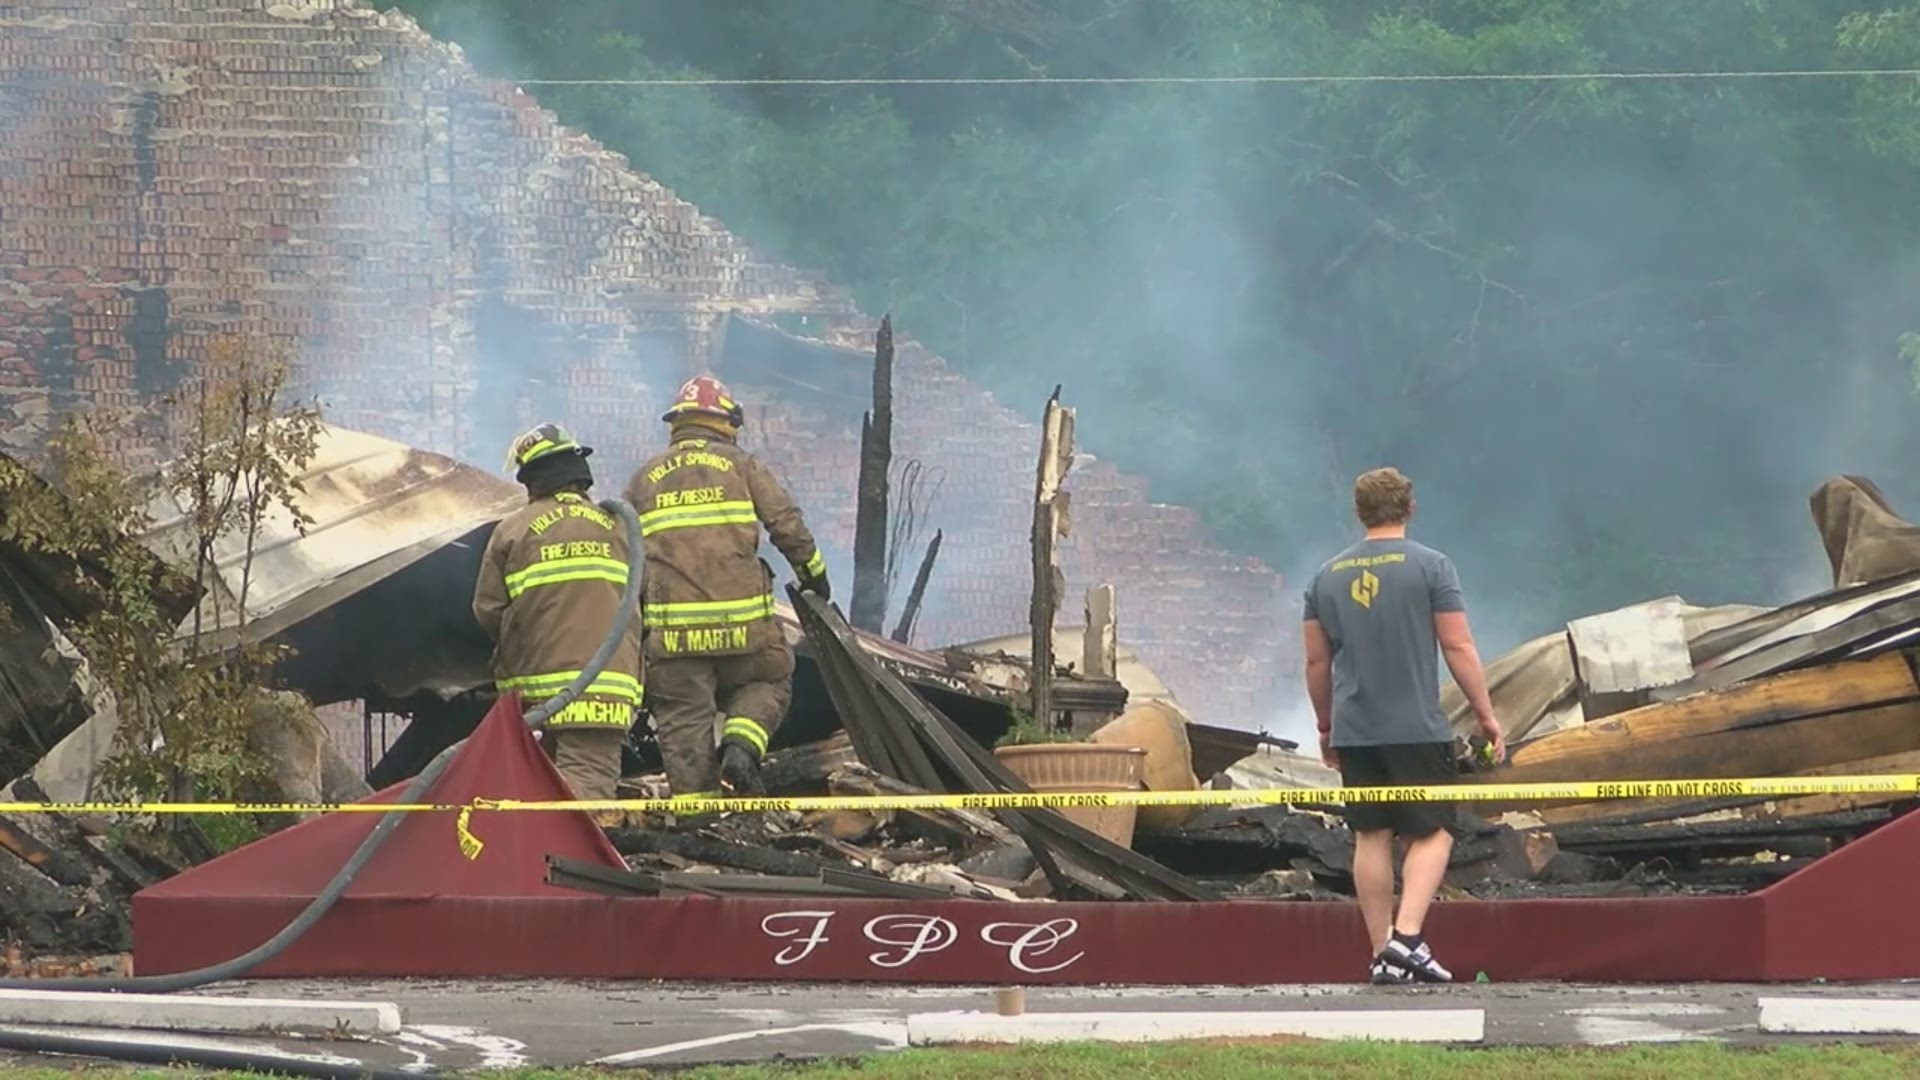 The fire happened early Wednesday morning at the First Pentecostal Church in Holly Springs, MS.